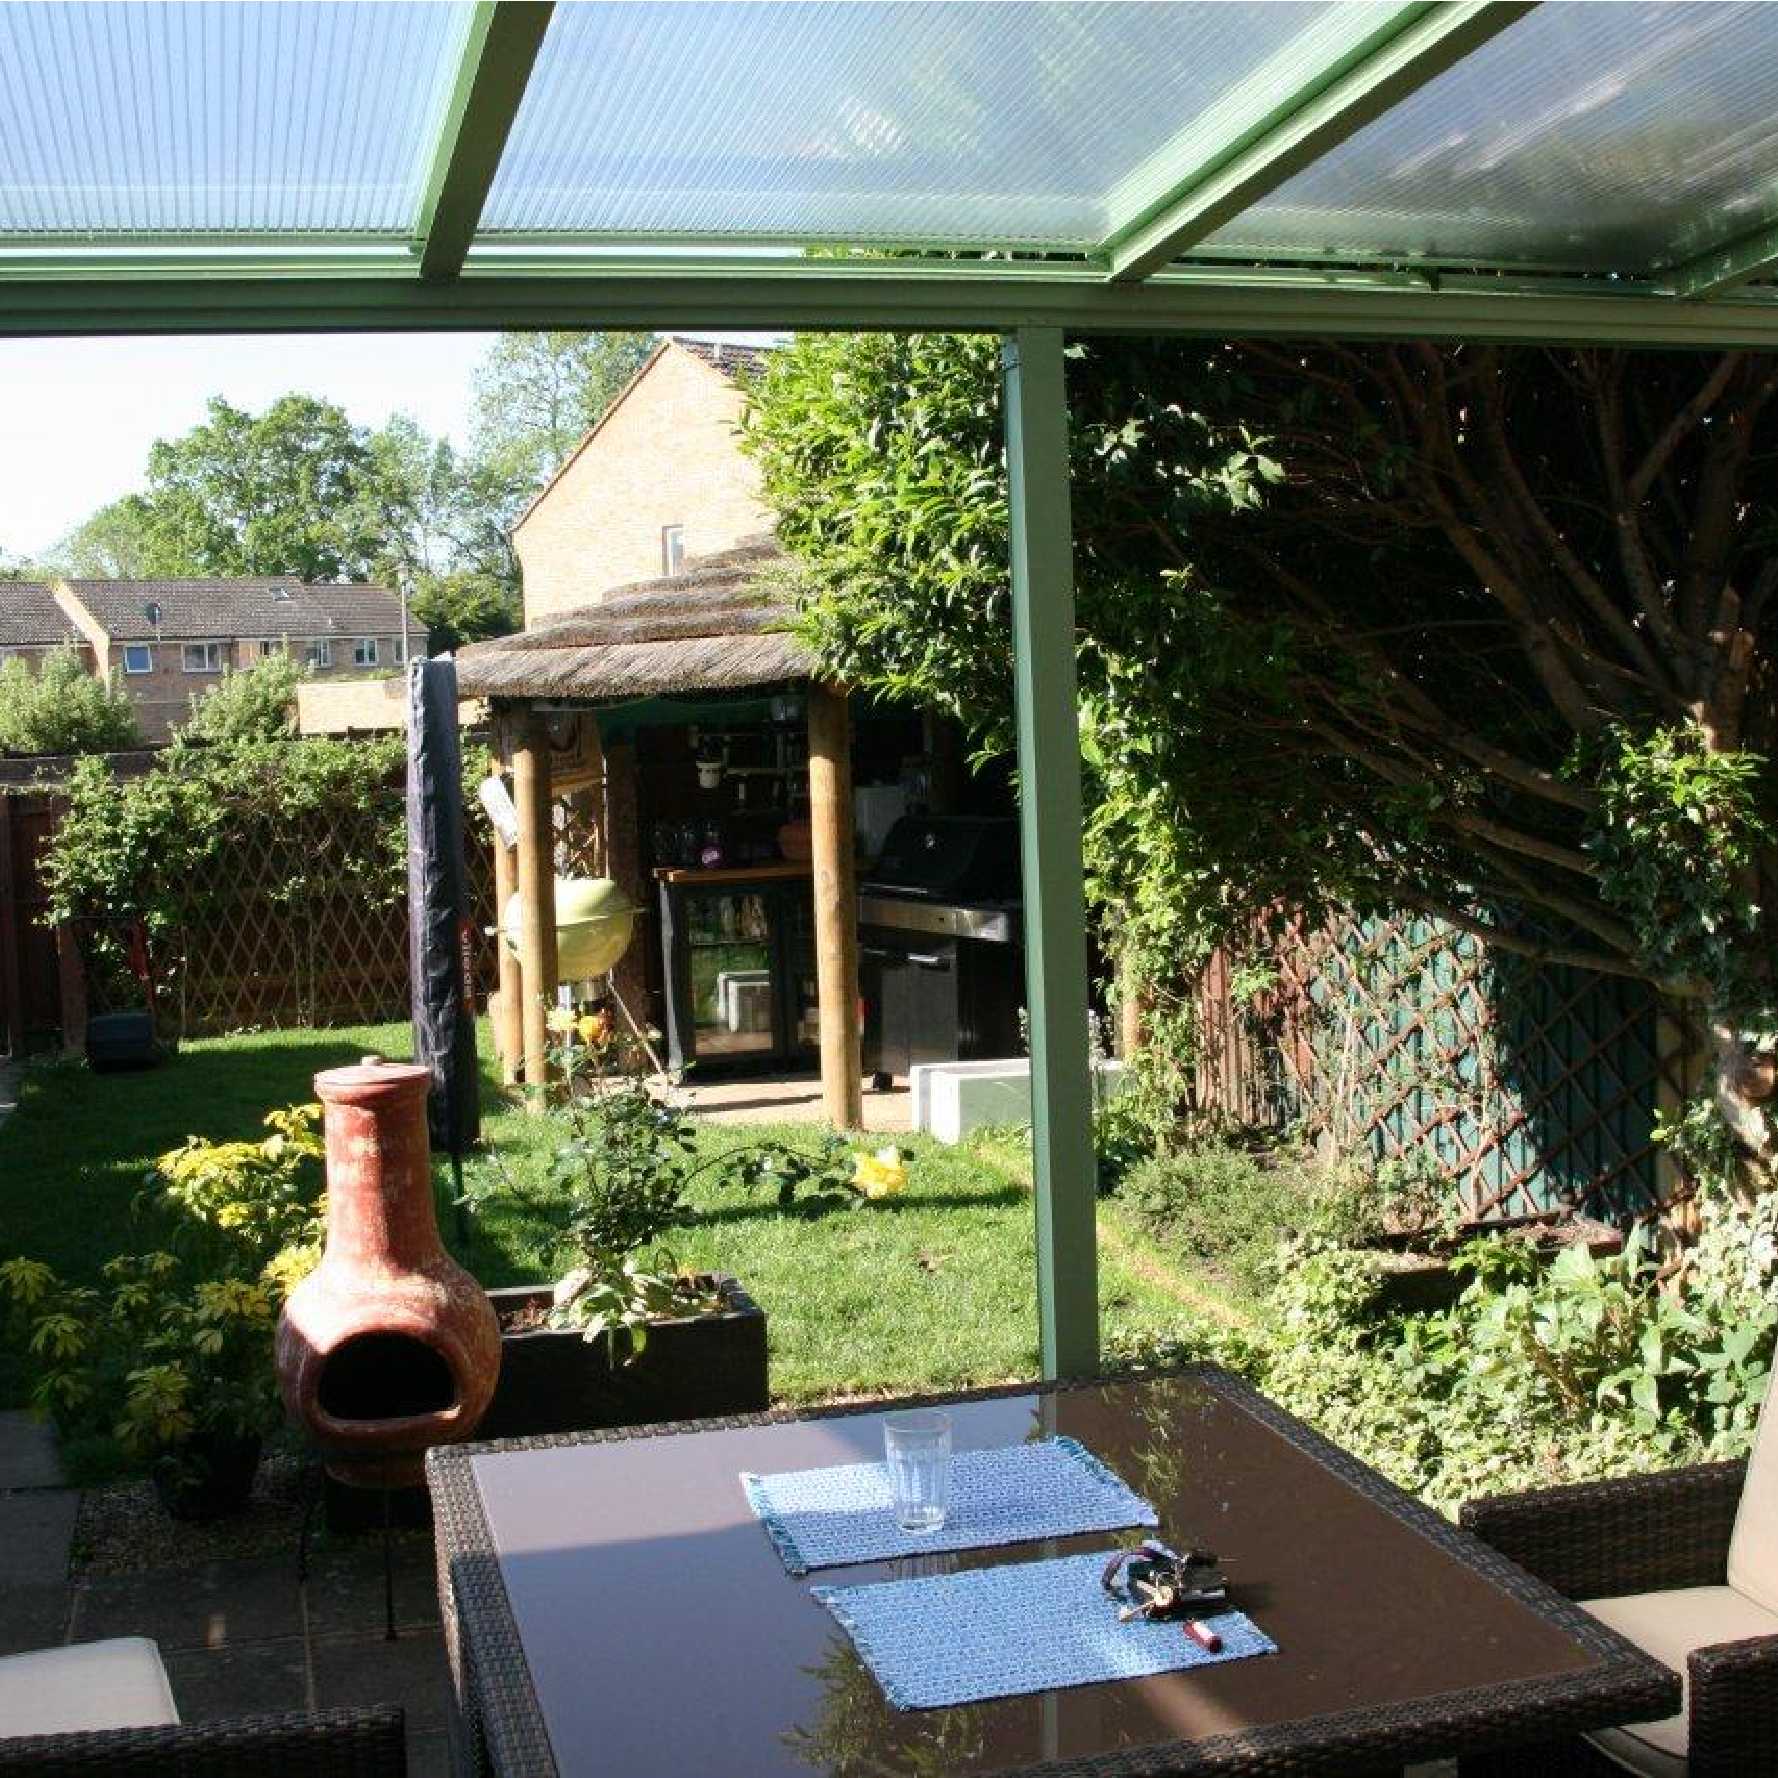 Affordable Omega Smart Lean-To Canopy, White with 16mm Polycarbonate Glazing - 6.3m (W) x 3.0m (P), (4) Supporting Posts